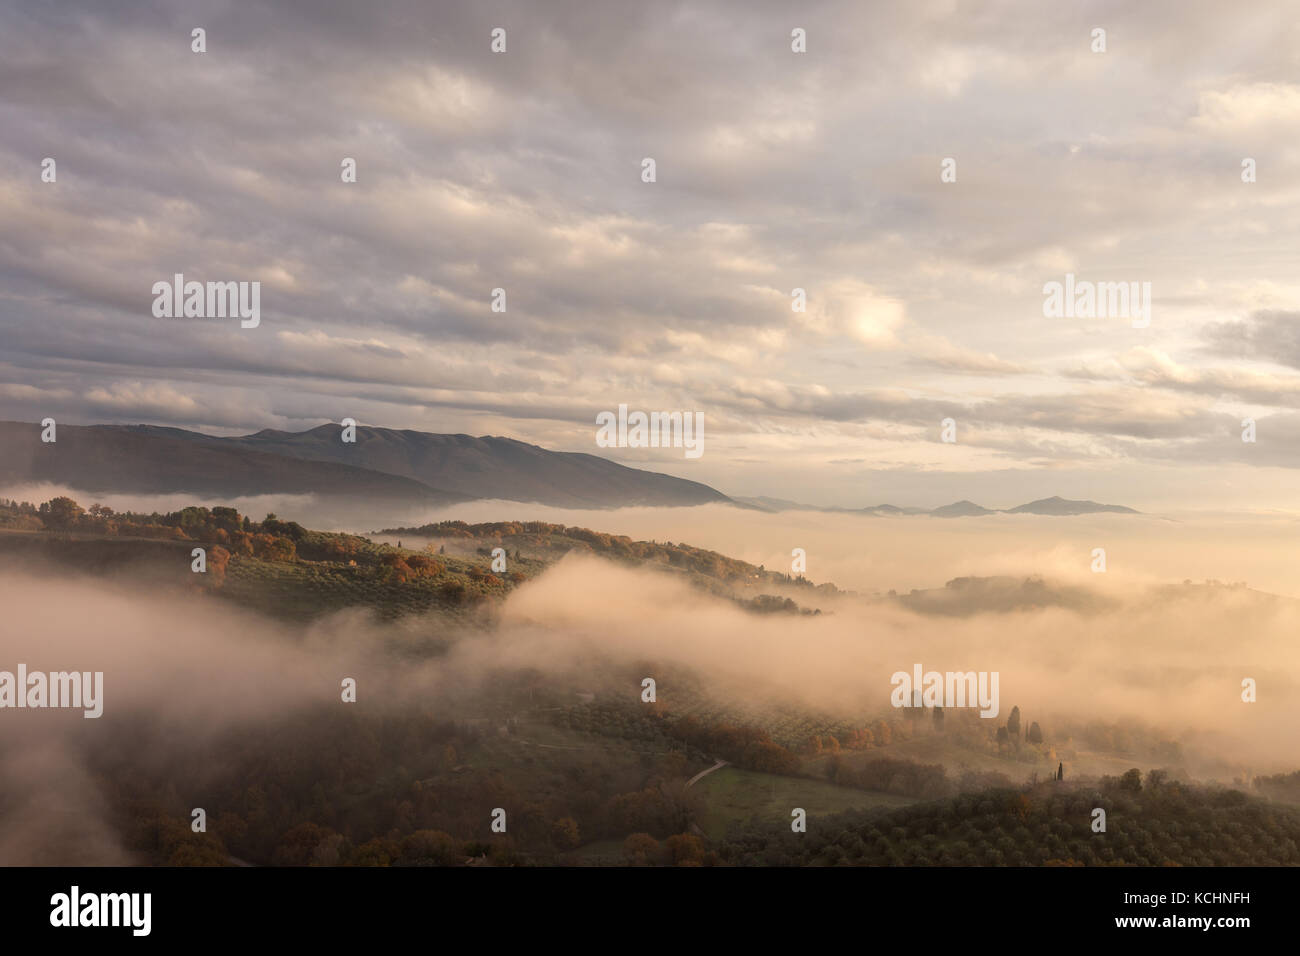 A valley in autumn filled by mist at sunset, with emerging hills and trees and beautiful warm, orange tones Stock Photo